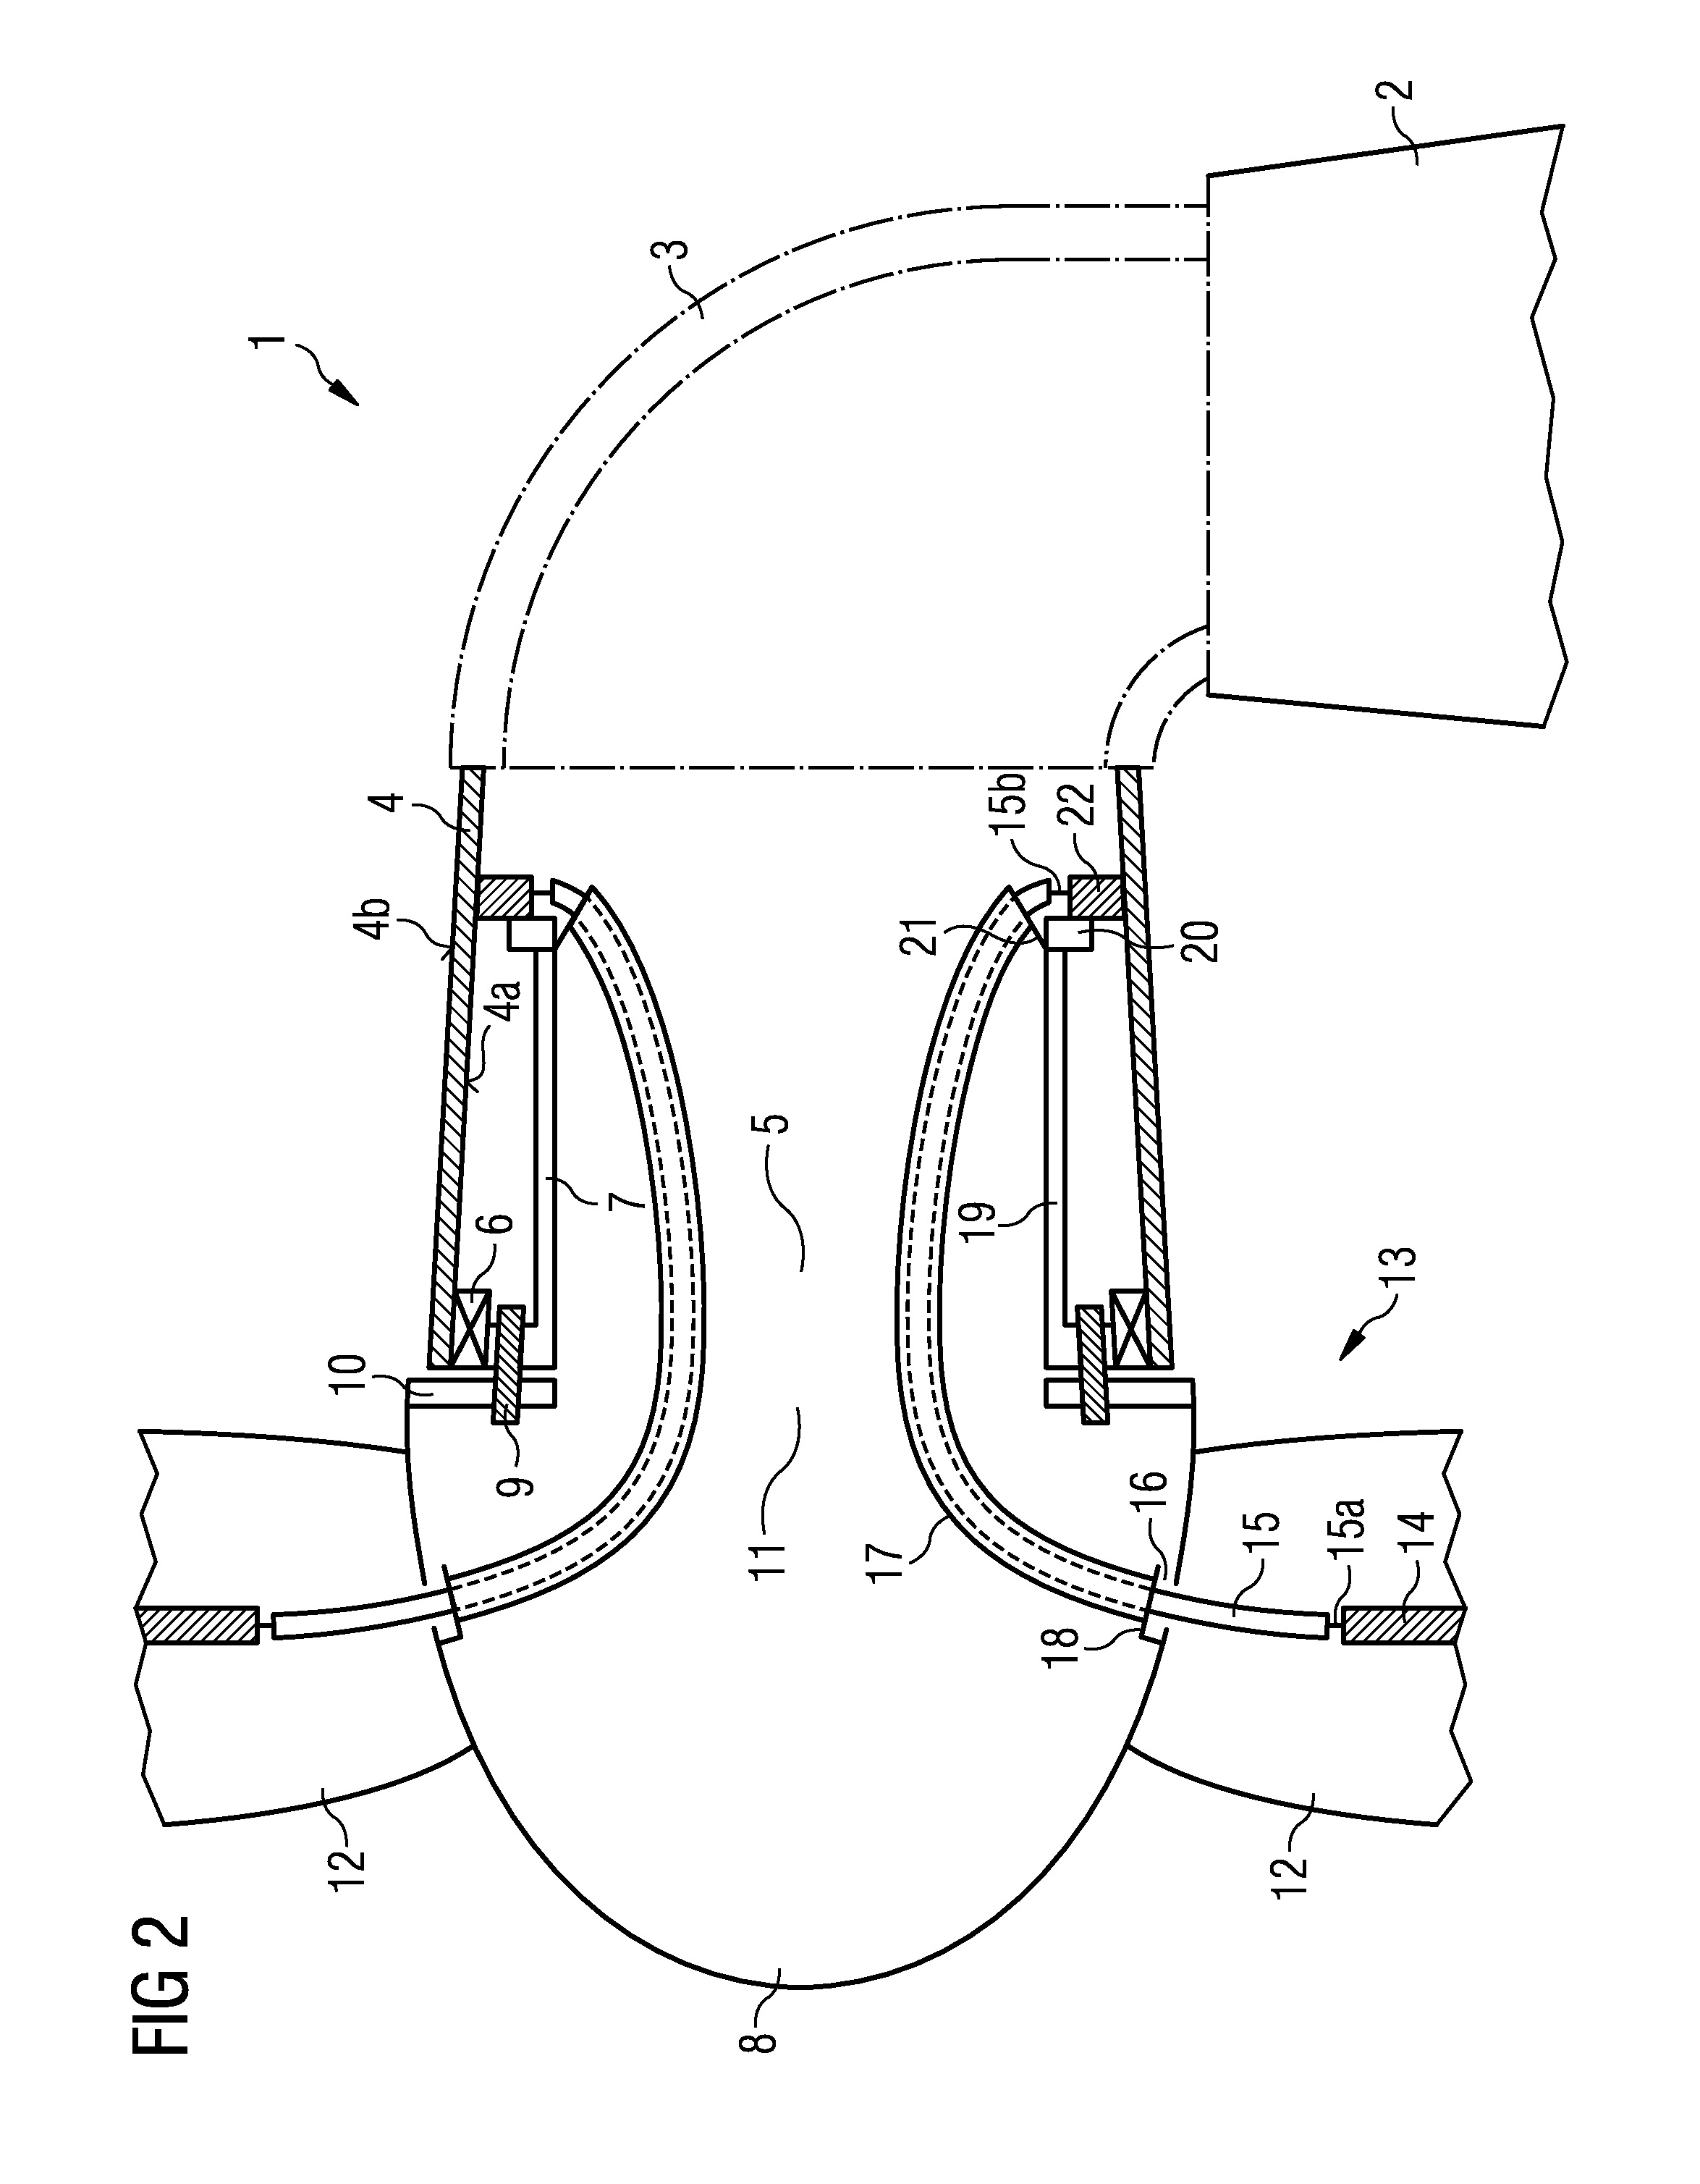 Lightning protection system for a wind turbine and wind turbine with a lightning protection system